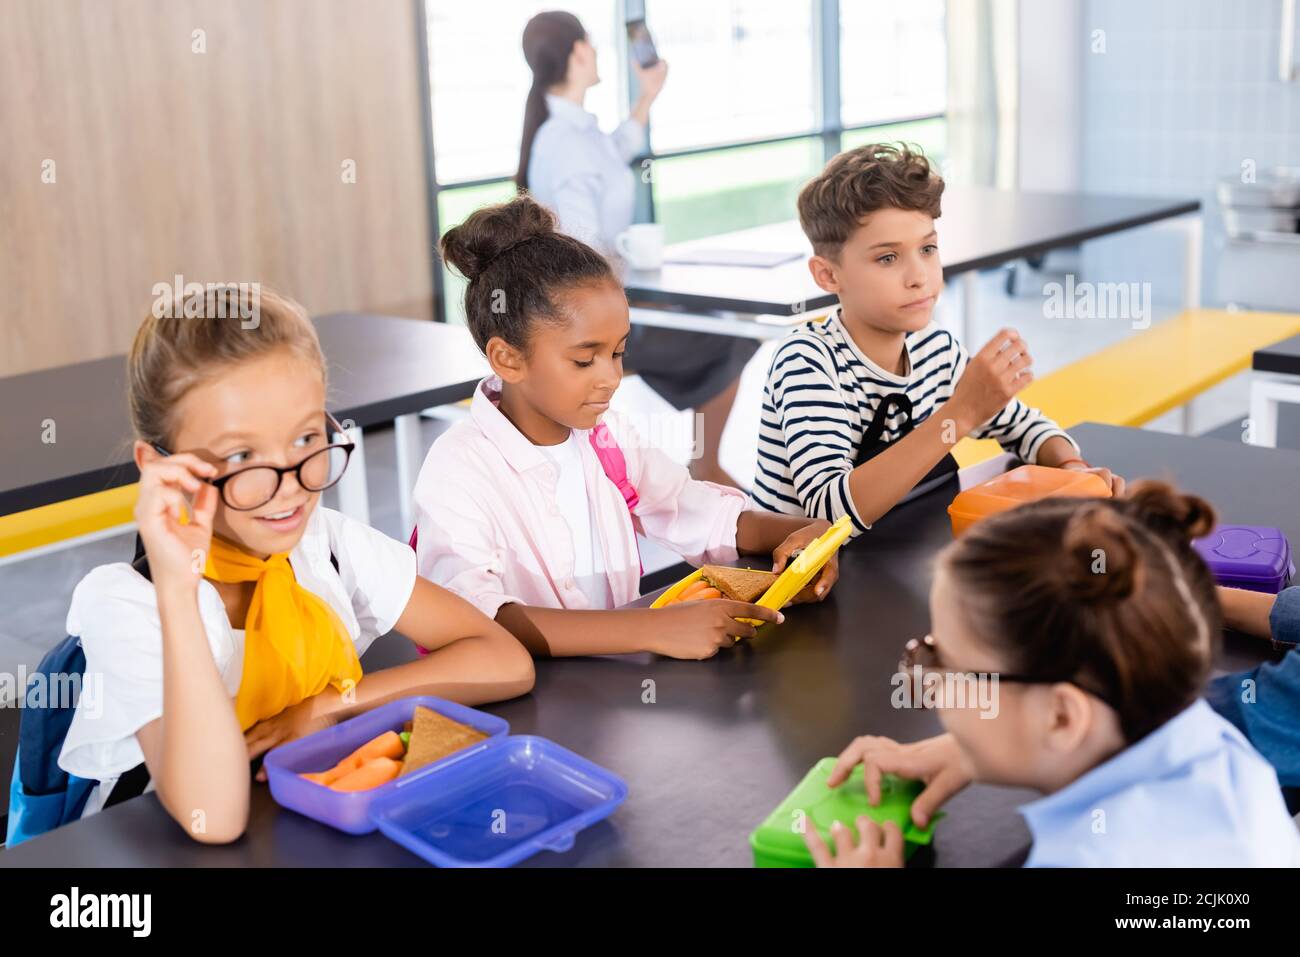 schoolgirls talking while sitting in school eatery with multicultural classmates and teacher on background Stock Photo